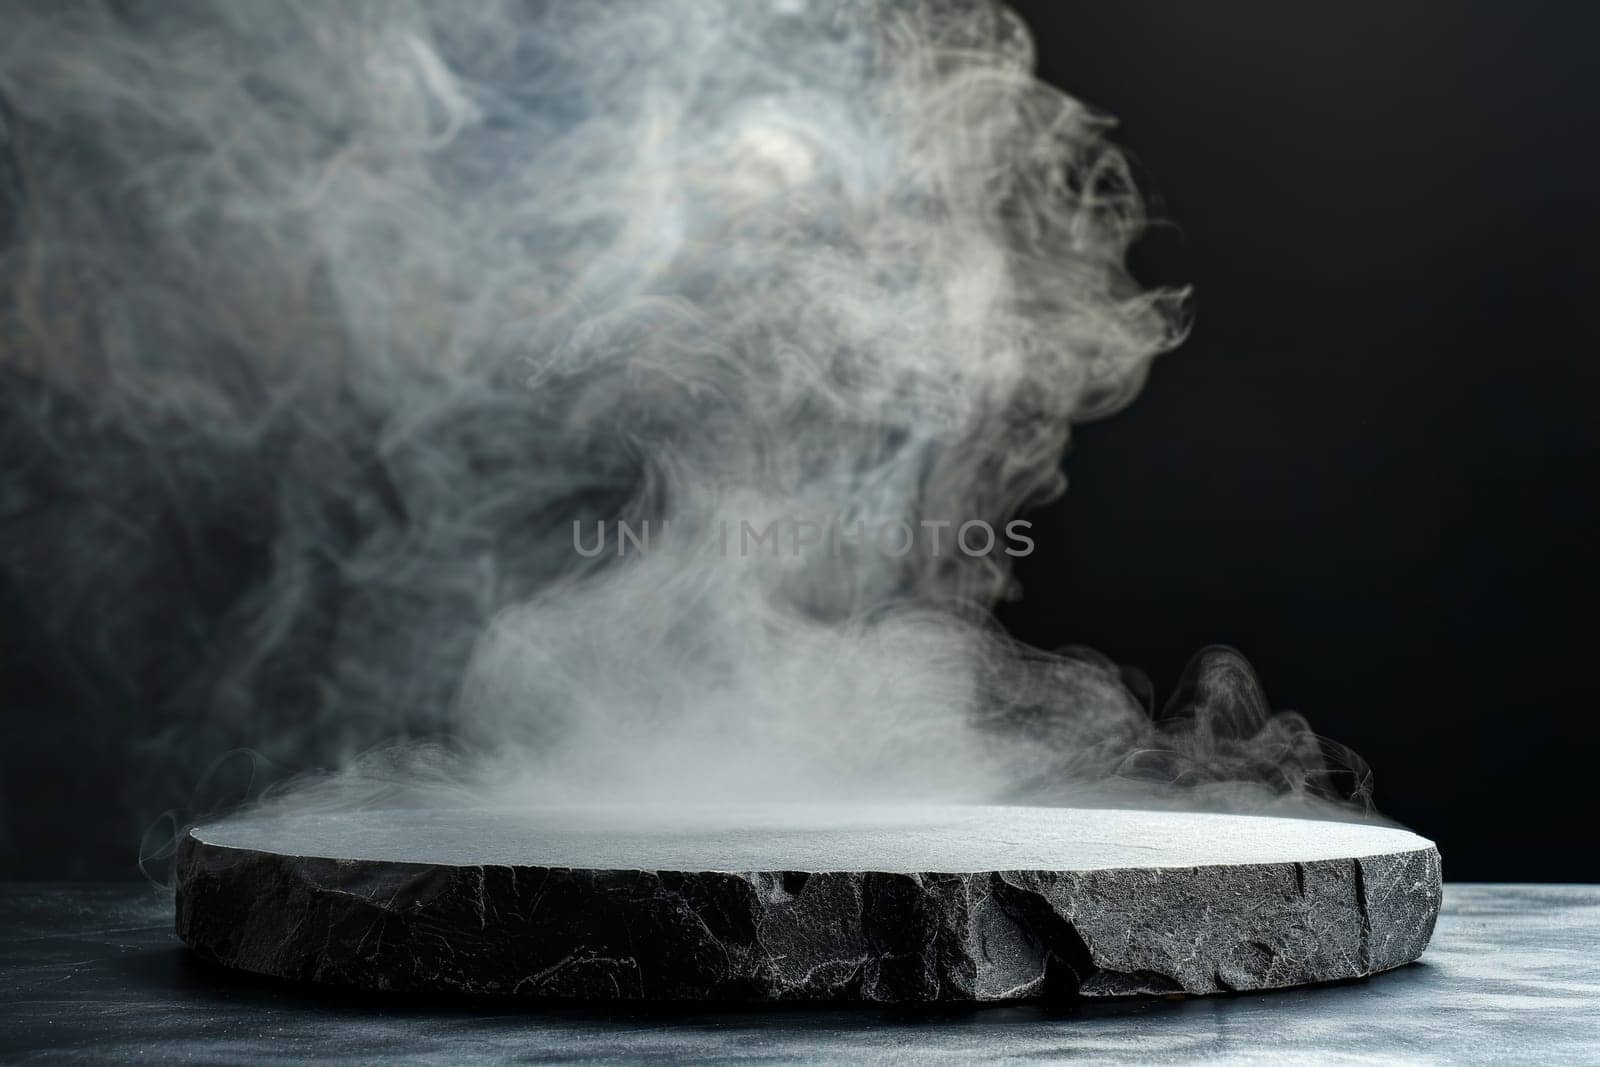 A black stone slab with a large amount of smoke coming out of it. The smoke is thick and dark, giving the impression of a mysterious and ominous atmosphere